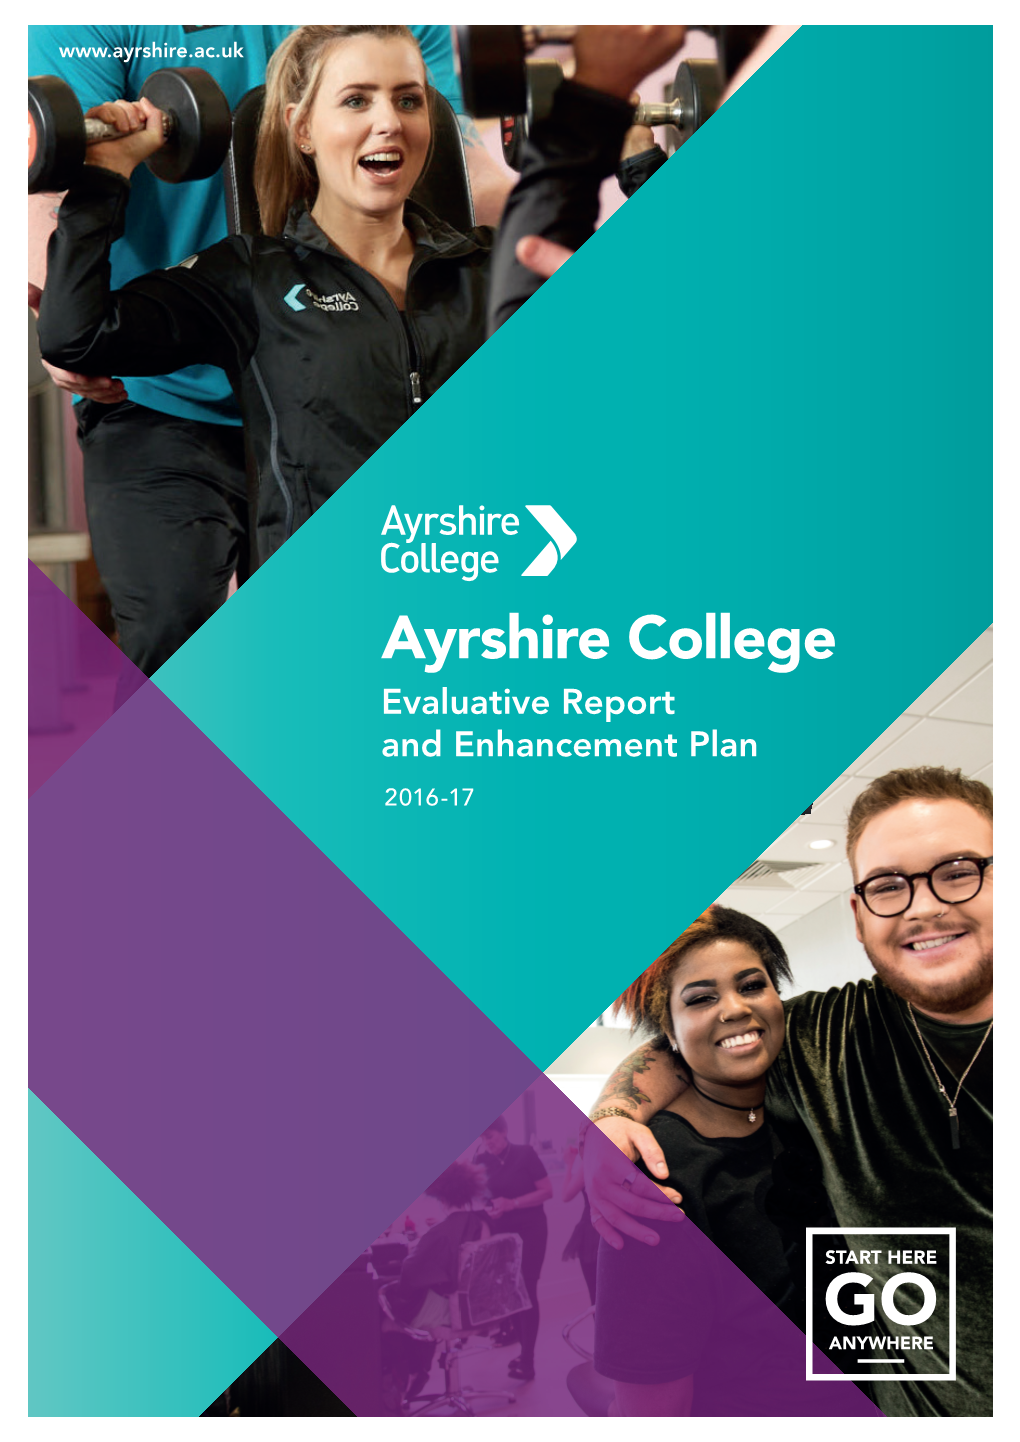 AYRSHIRE COLLEGE EVALUATIVE REPORT and ACTION PLAN 2016-17 1 Context